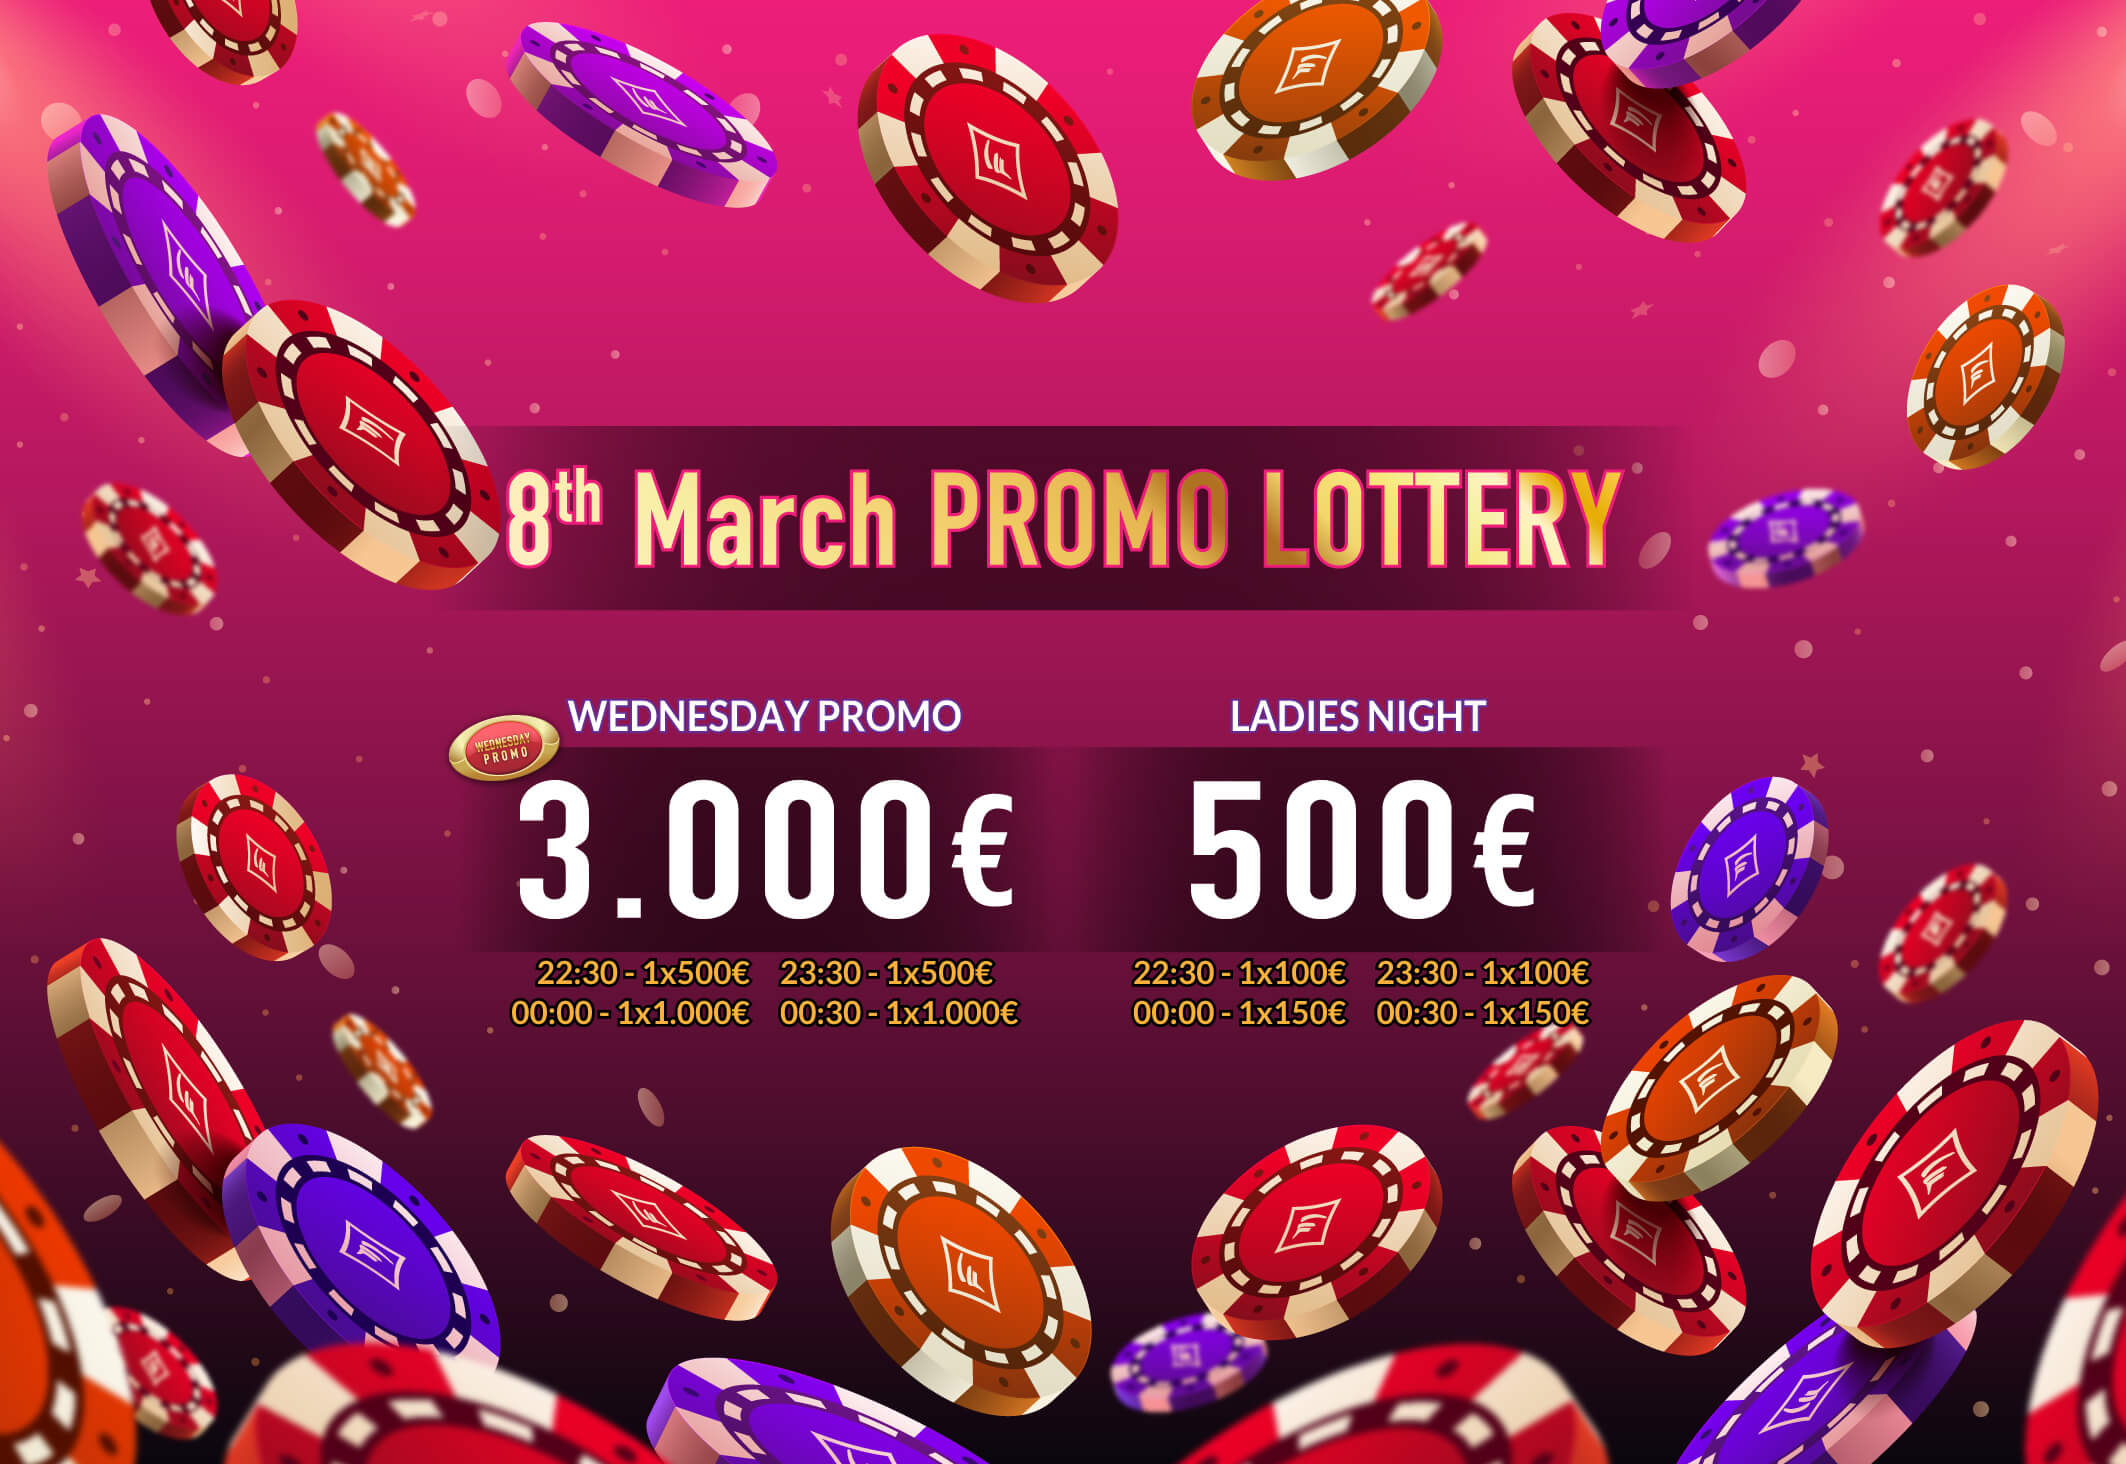 8th MARCH PROMO LOTTERY